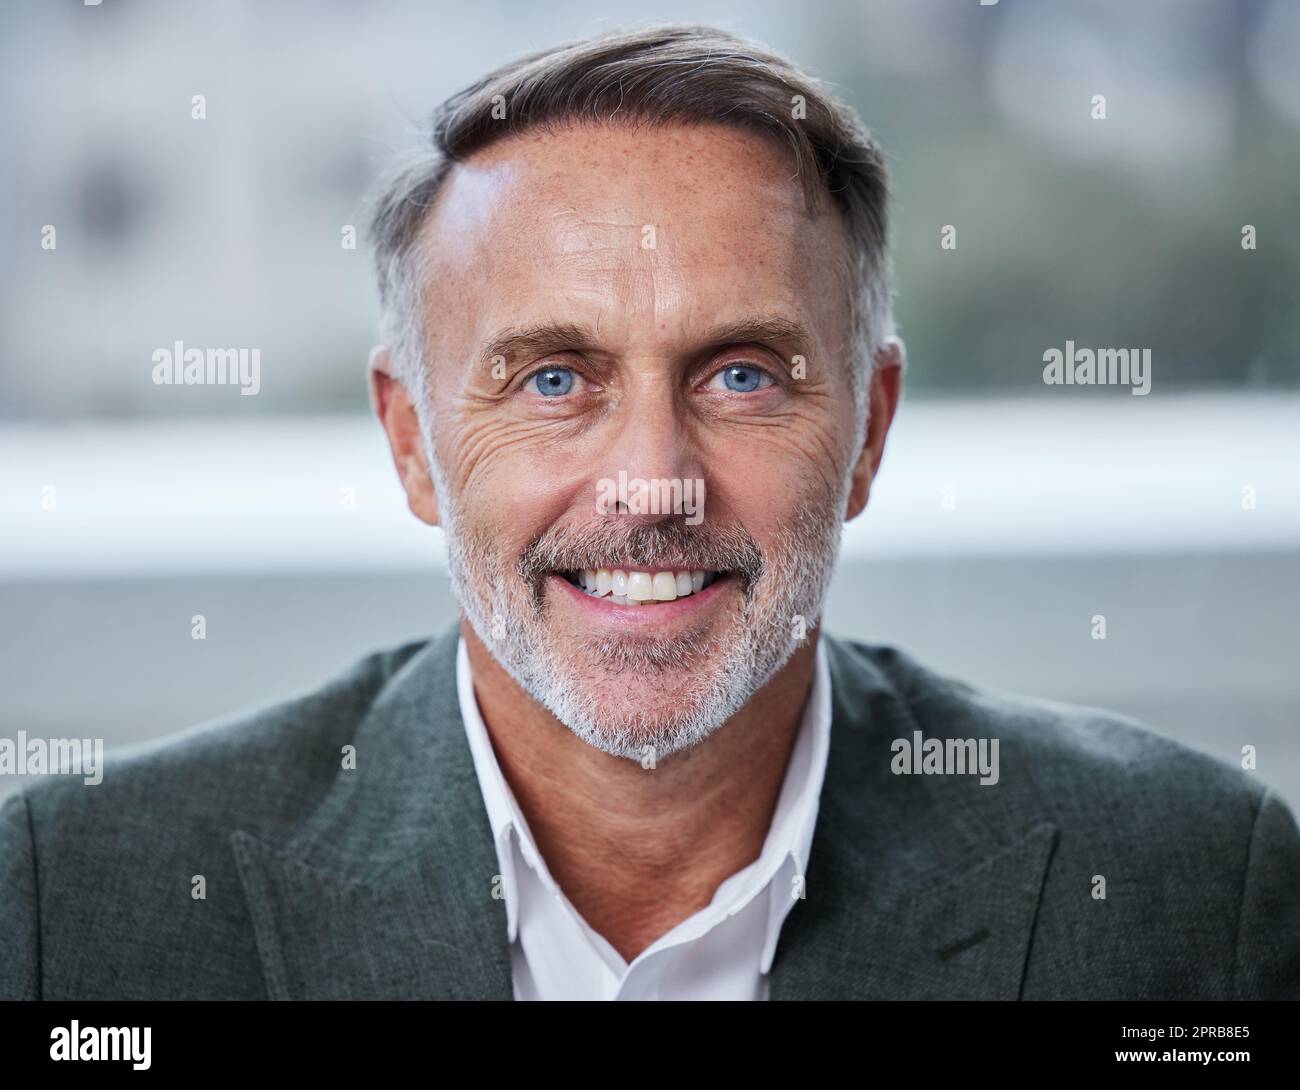 Before you are a leader, success is about growing yourself. Portrait of a confident mature businessman in an office. Stock Photo